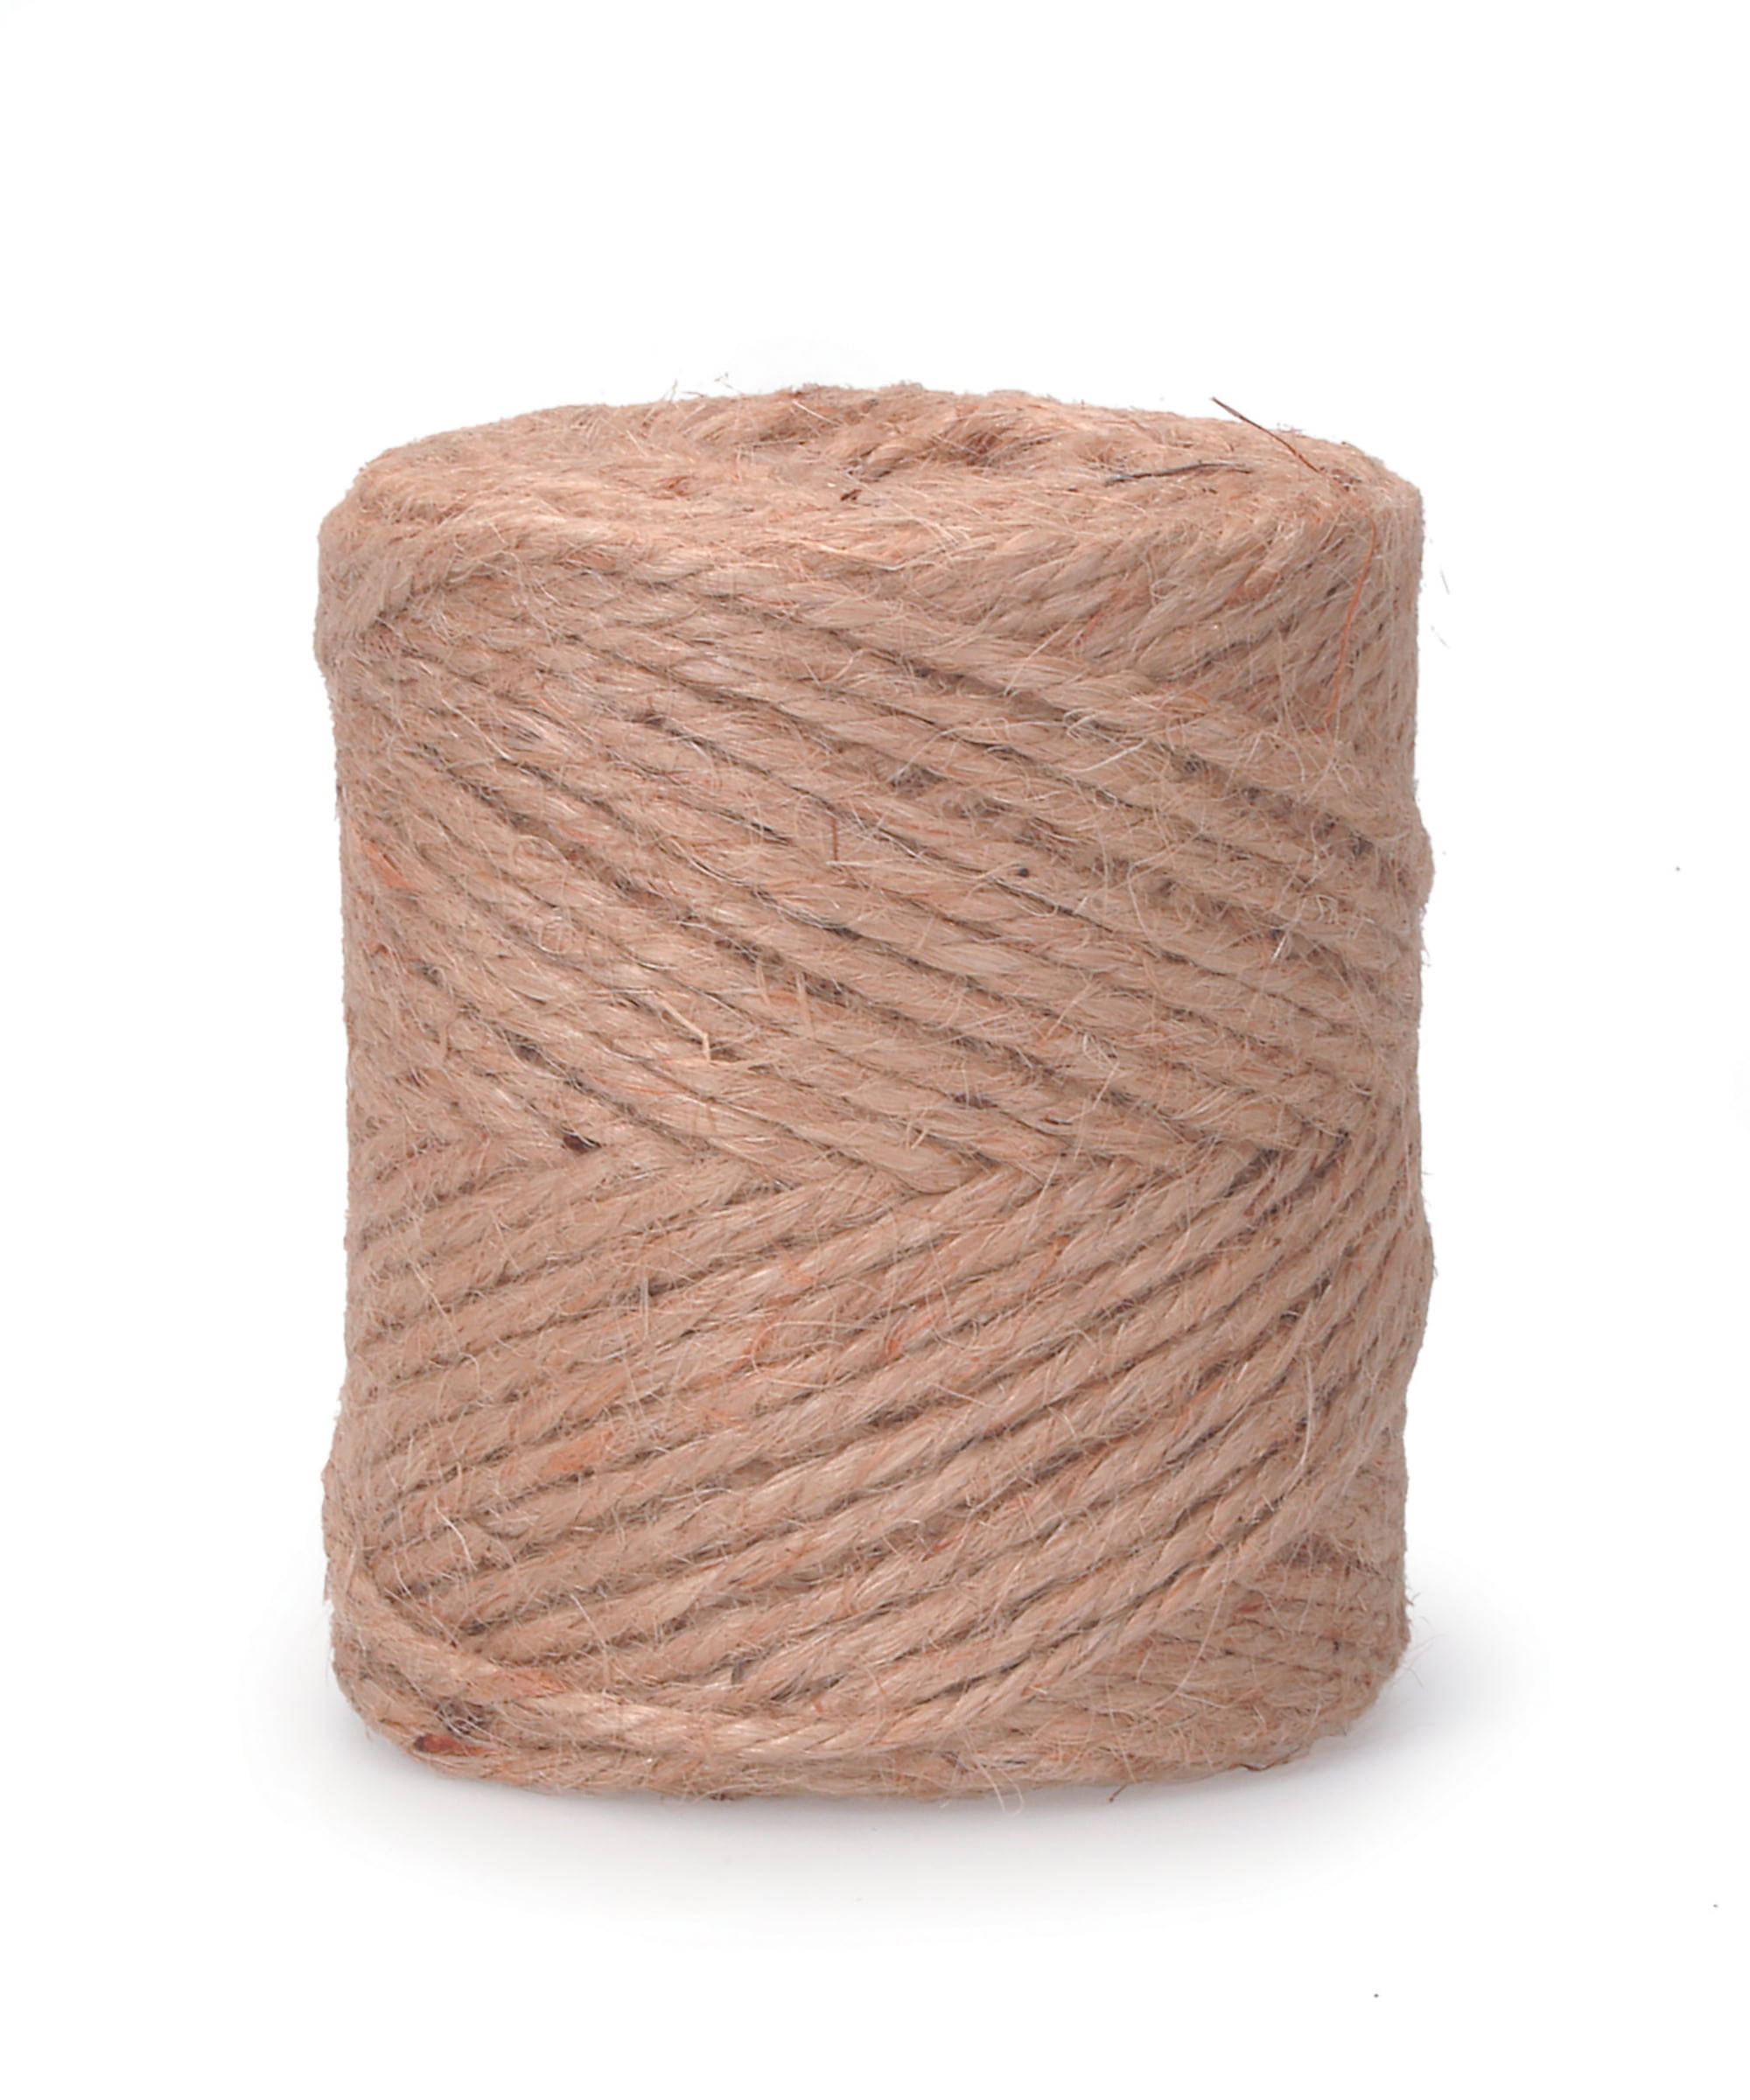 All-Natural 200' Premium Jute Twine String 3-ply Cord Rope for Crafts & DIY